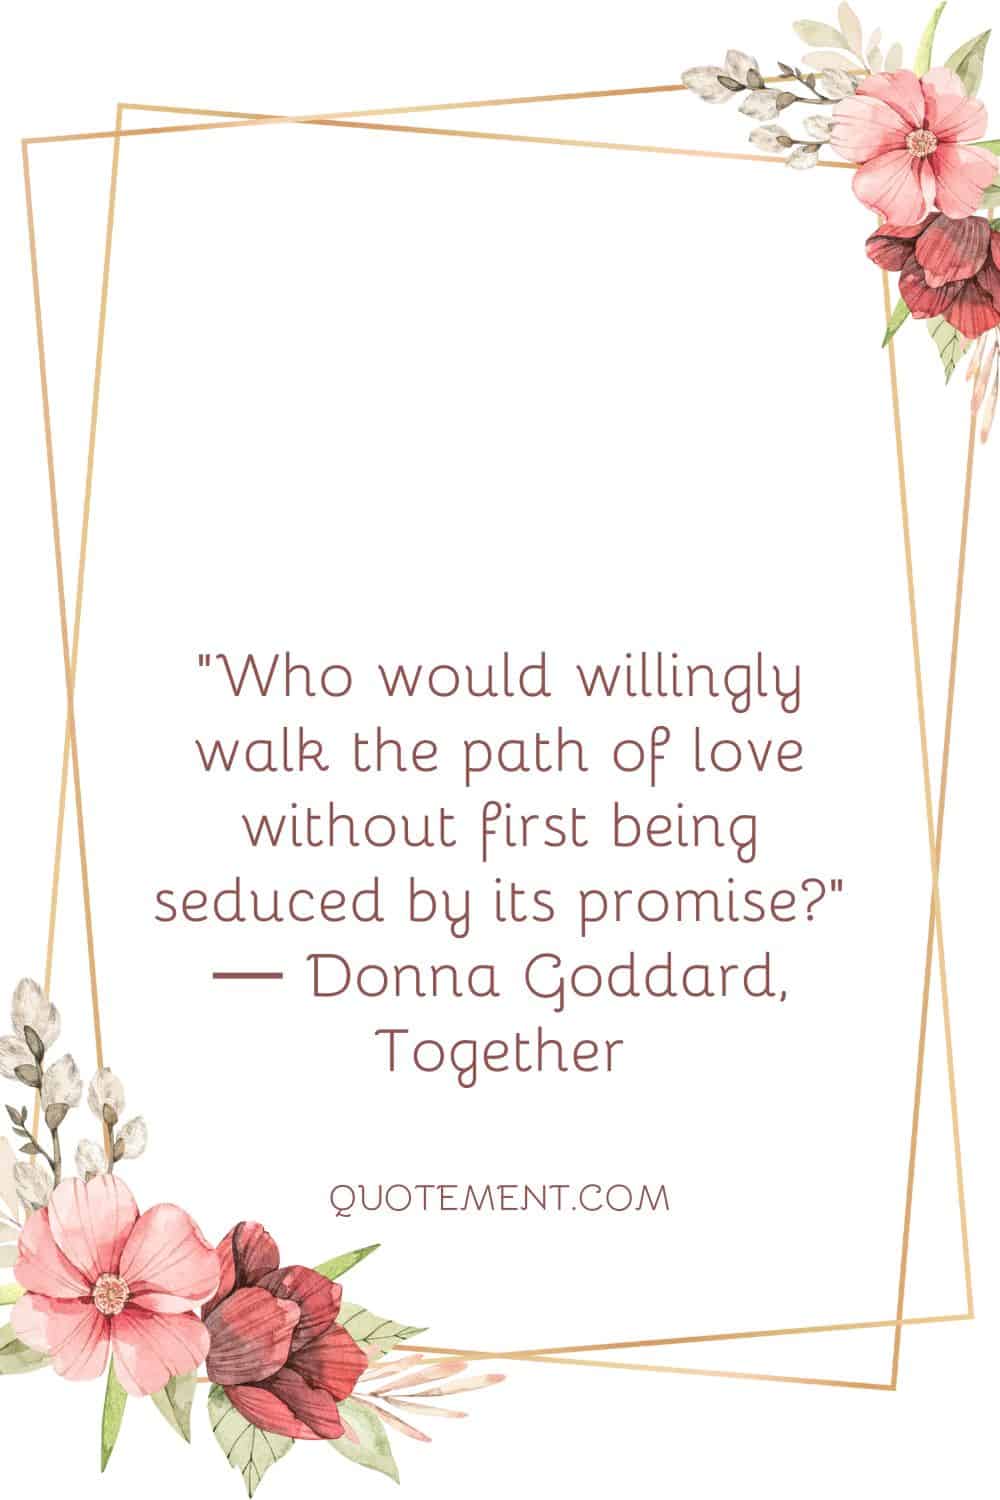 Who would willingly walk the path of love without first being seduced by its promise